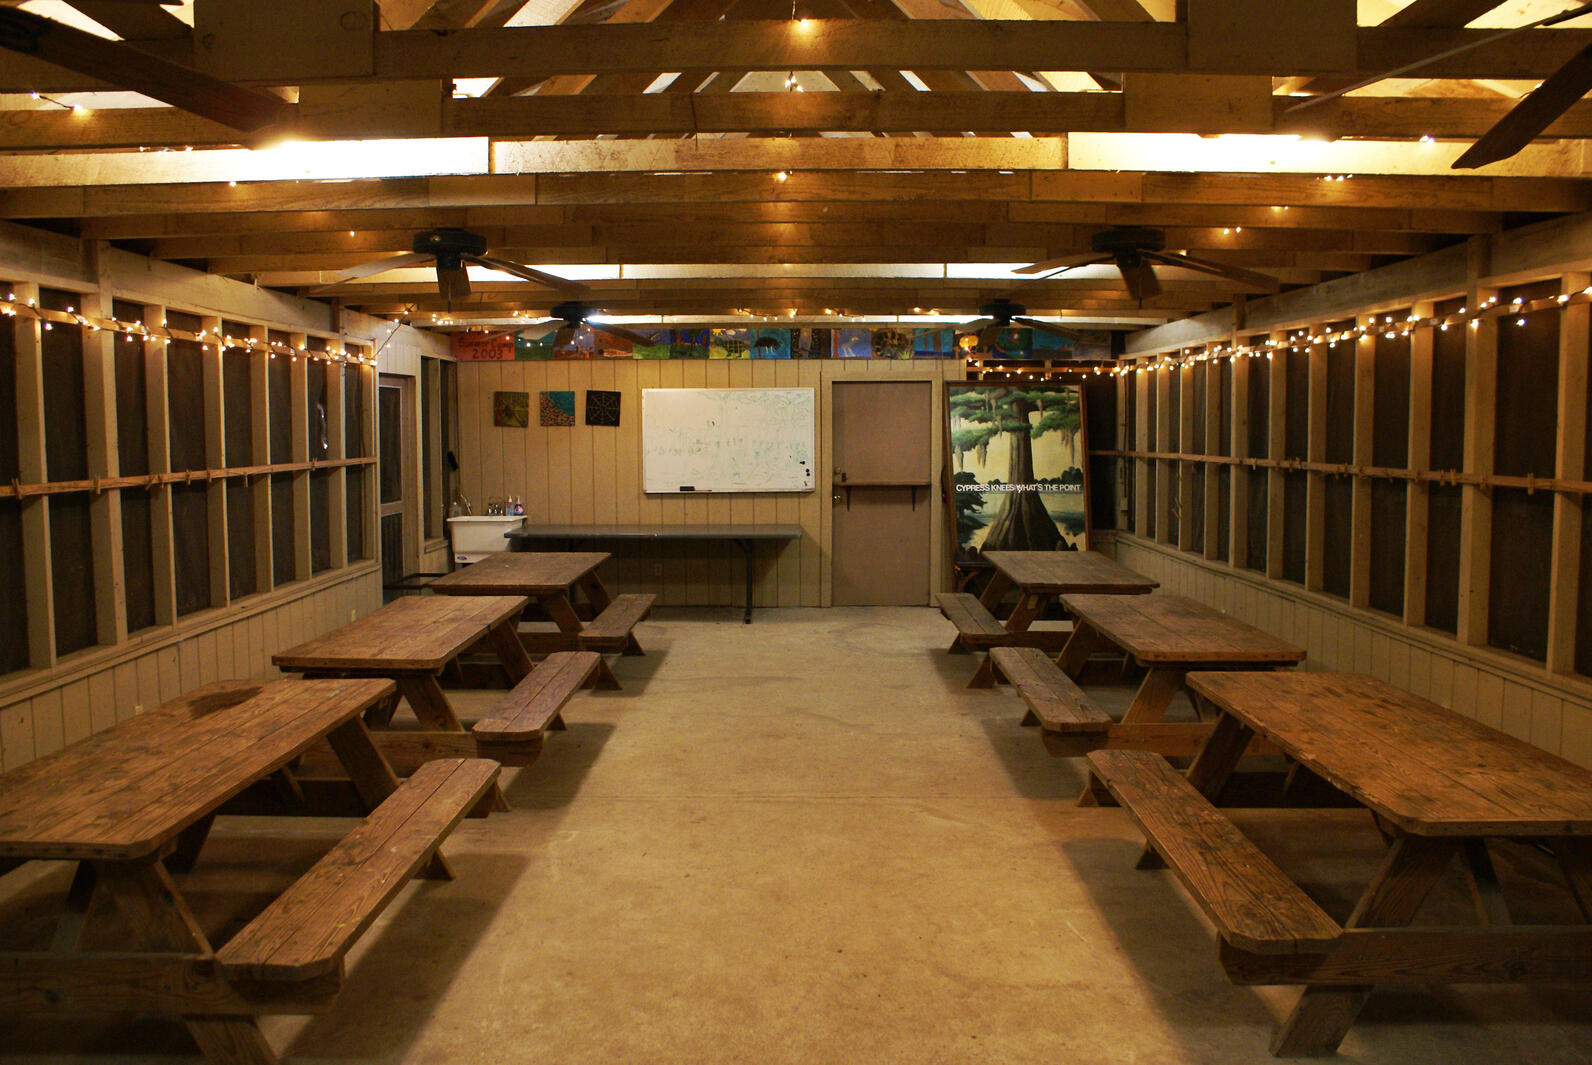 A view from inside Beidler's outdoor classroom. The screened-in walls are framed by rows of tables, three on either side. In the back of the room is another table, a sink, and a message board.